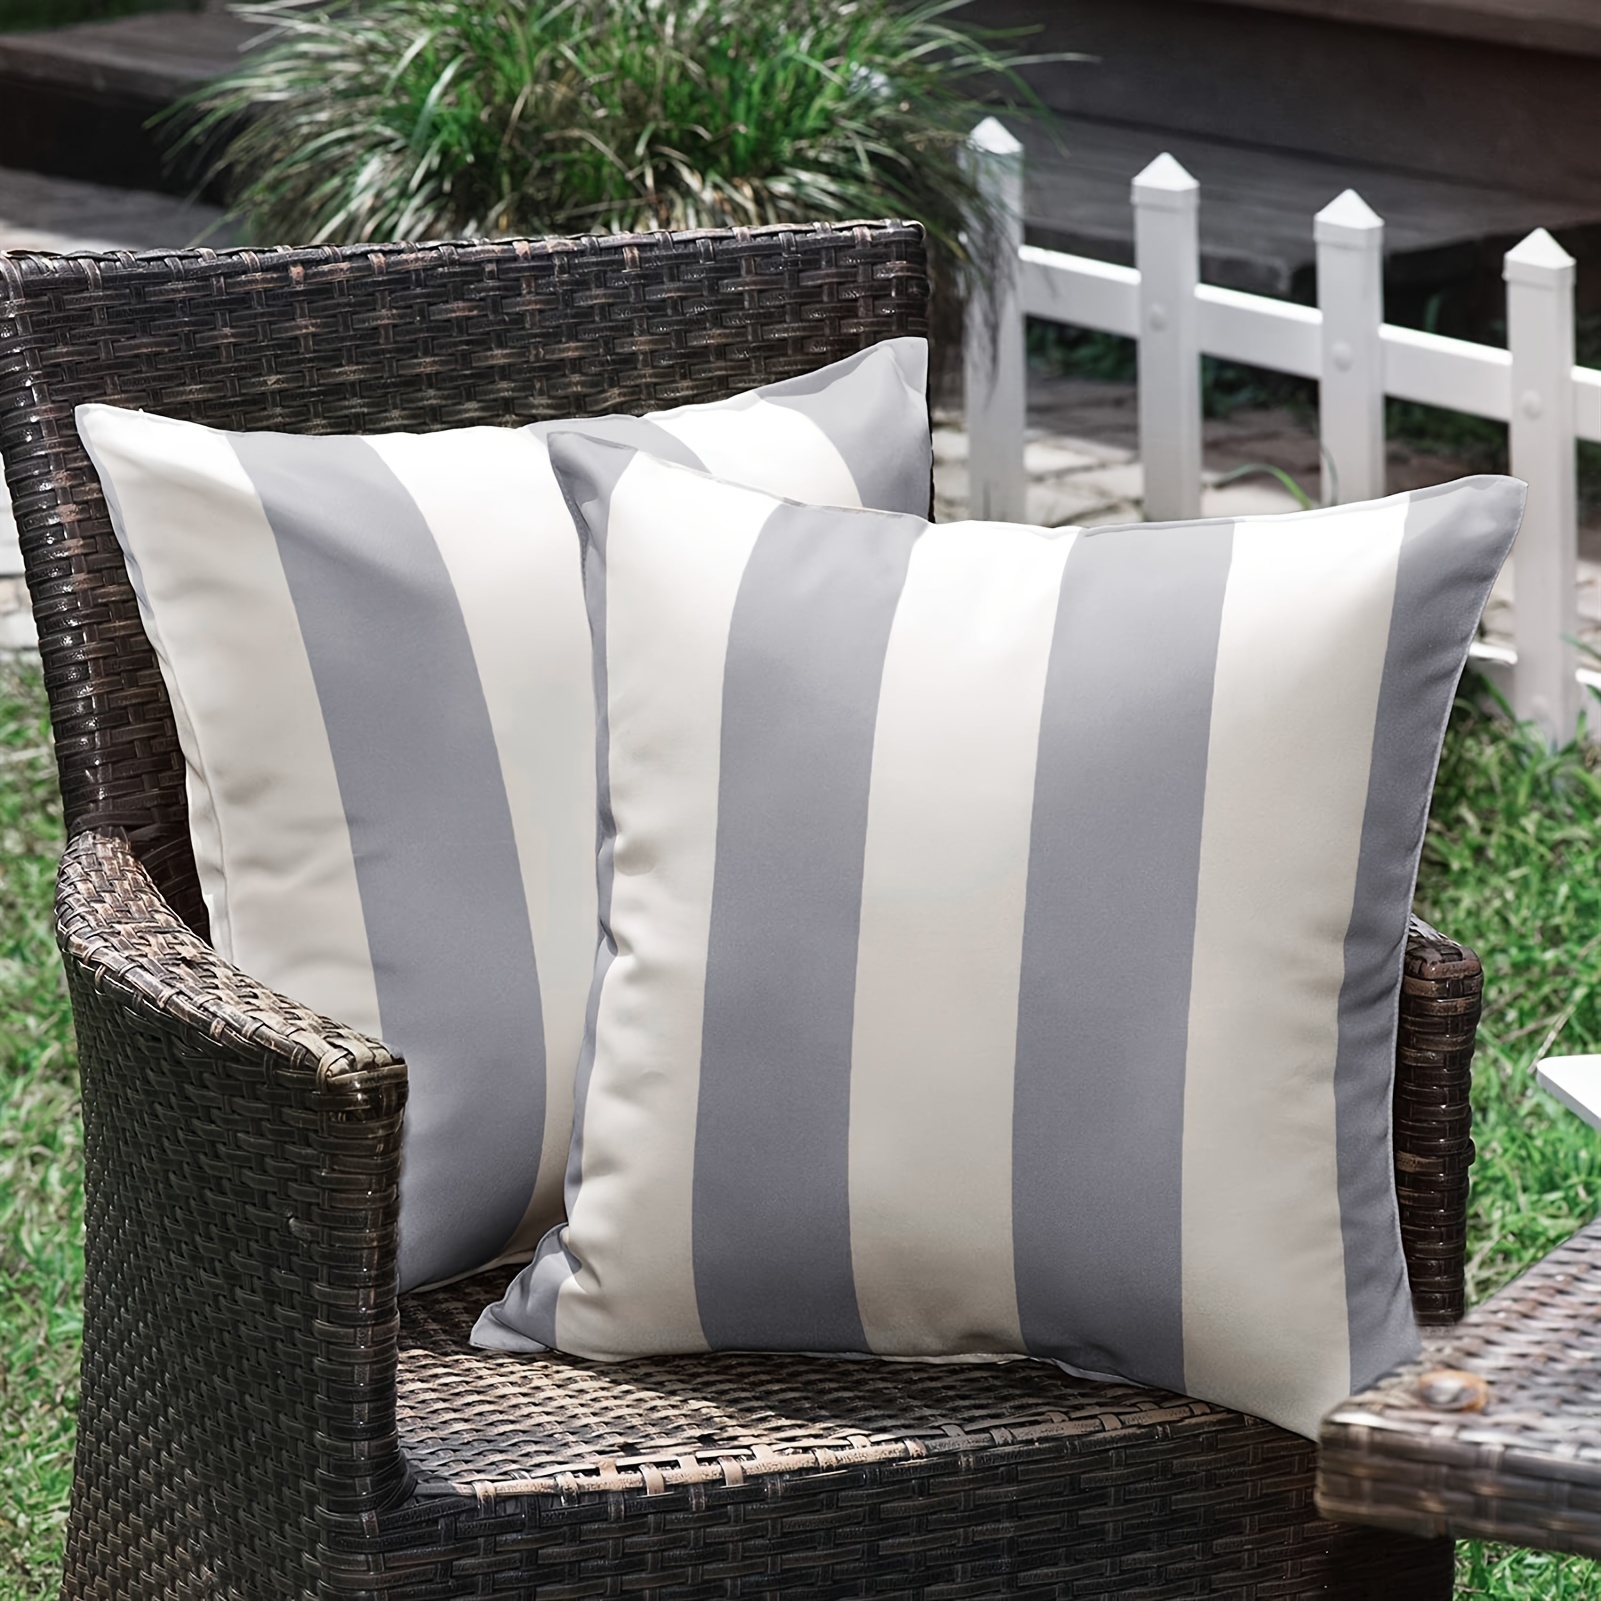 

Outdoor Striped Waterproof Pillow Covers - Set Of 2, 18x18 Inches, Zipper Closure, Suitable For Tents, Gardens, And Patio Furniture